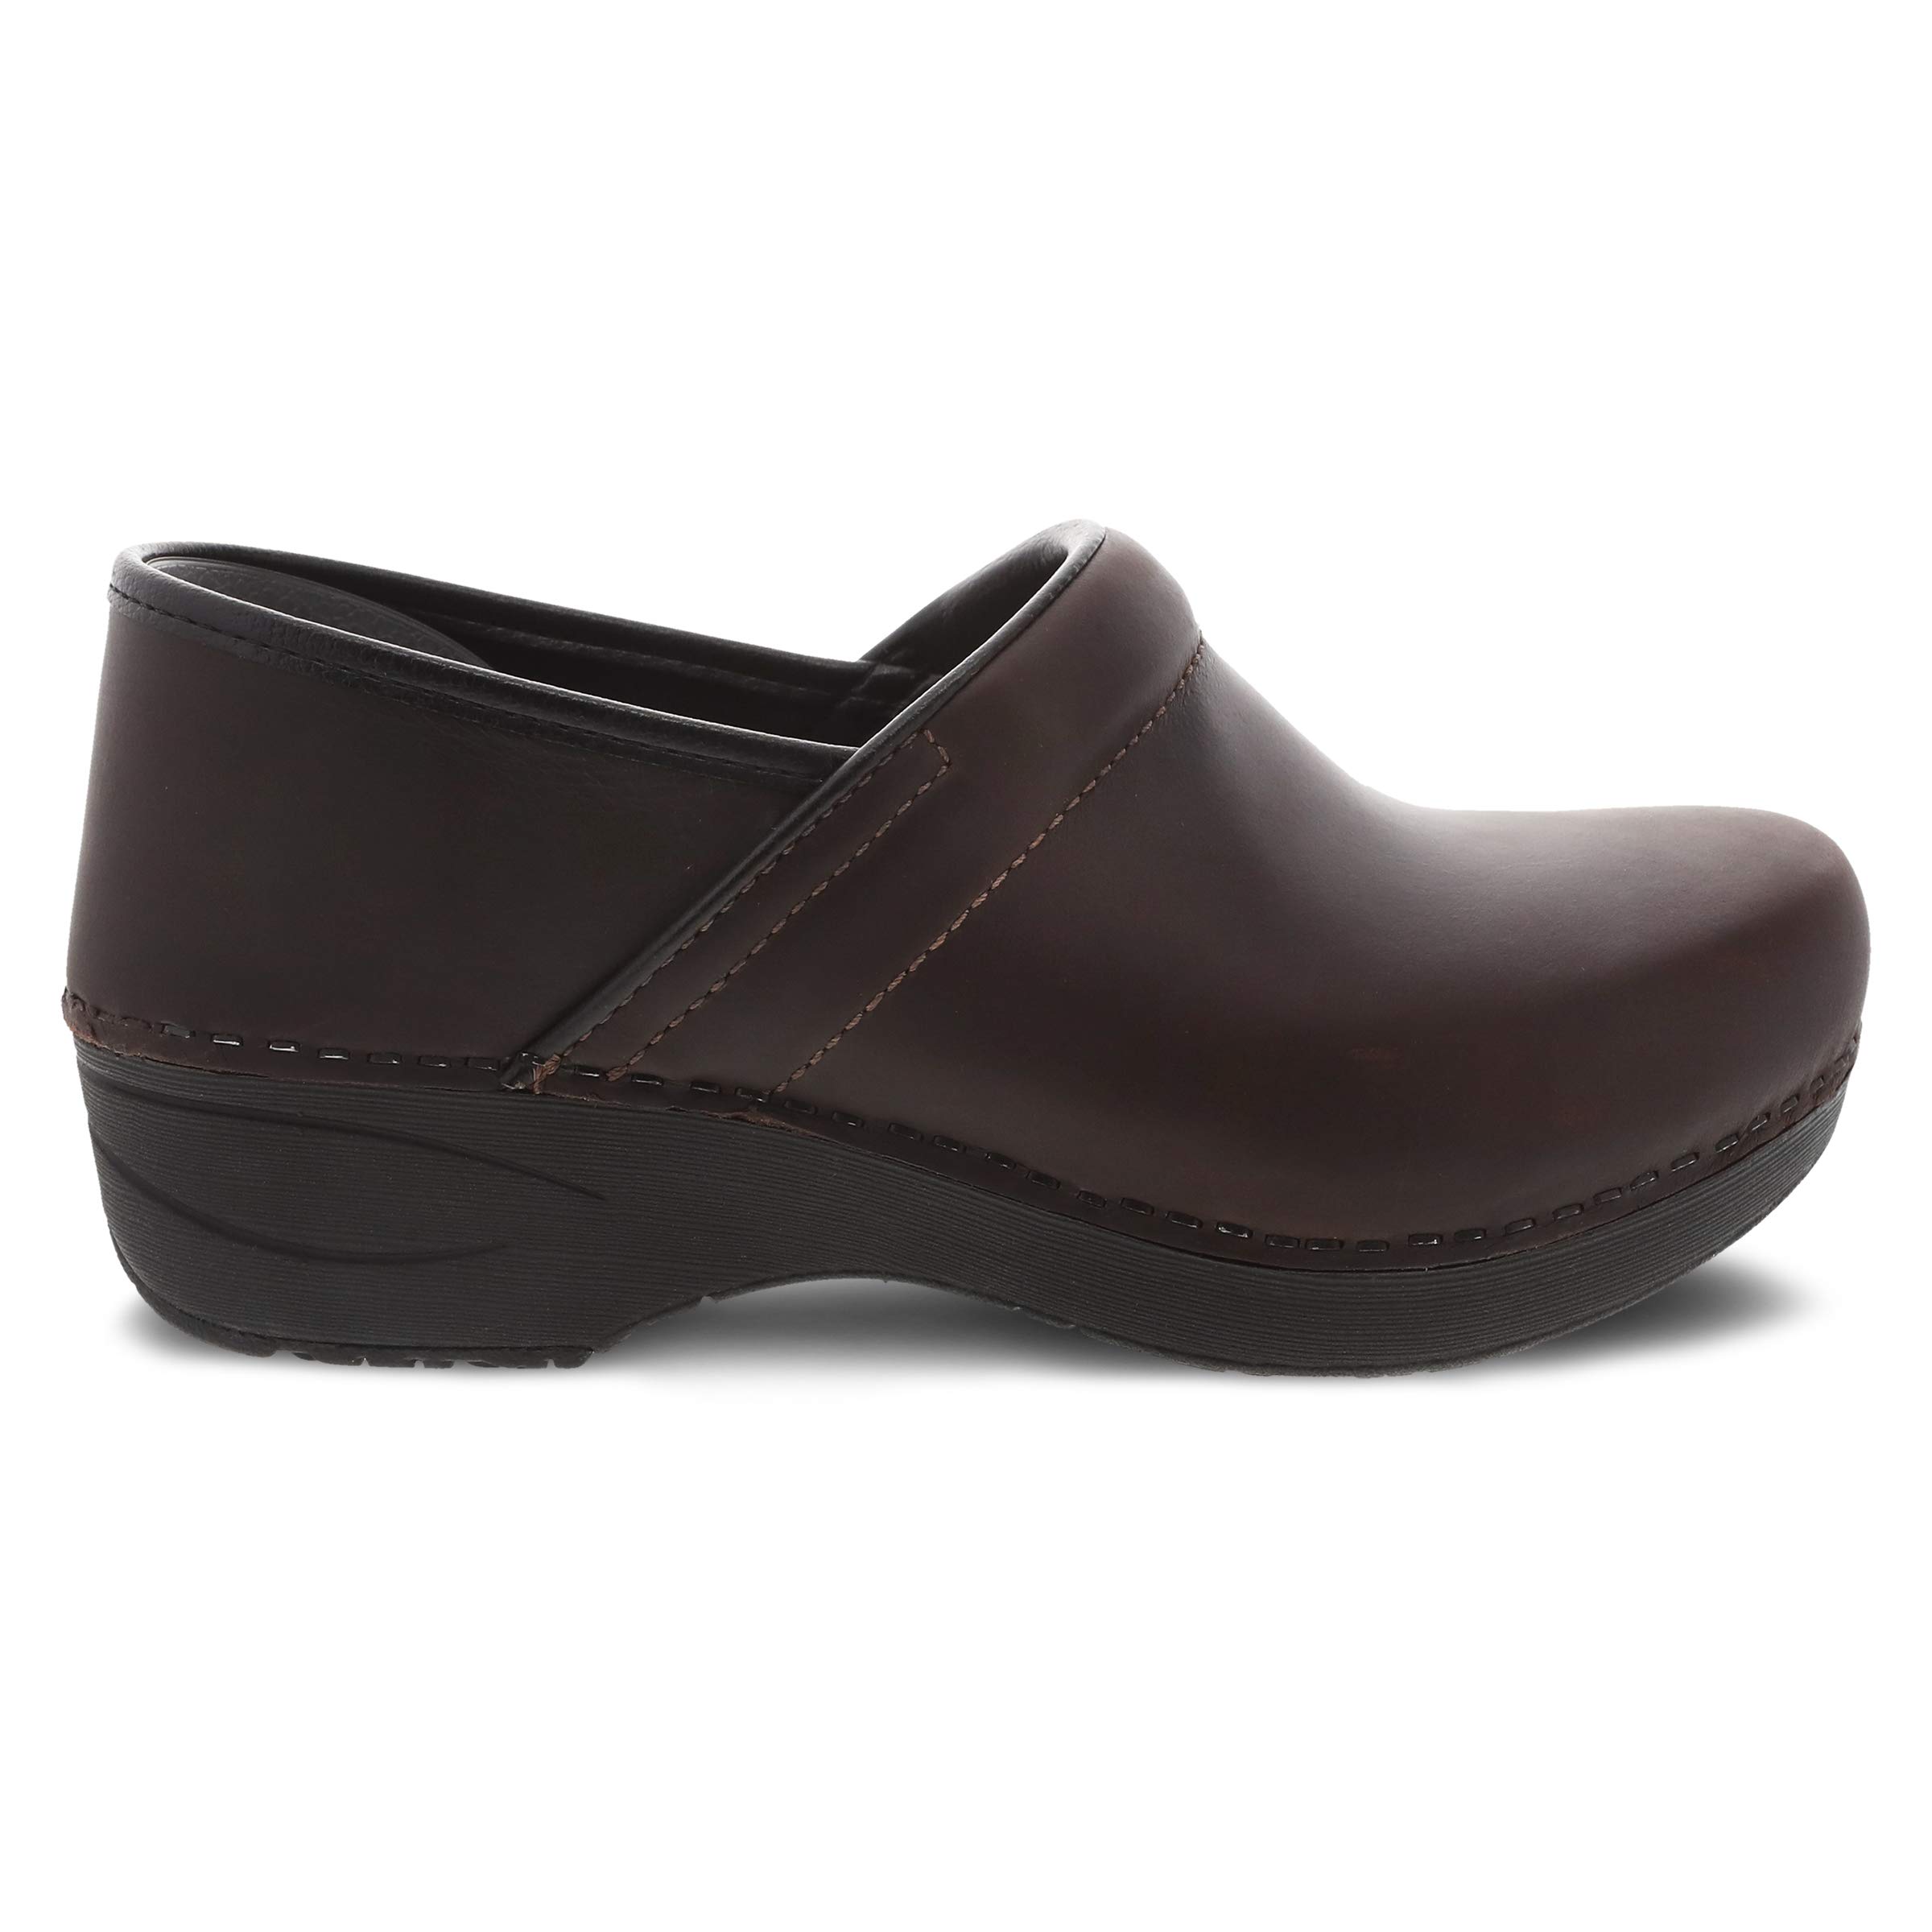 Dansko XP 2.0 Clogs for Women – Lightweight Slip Resistant Footwear for Comfort and Support – Ideal for Long Standing Professionals – Nursing, Veterinarians, Food Service, Healthcare Professionals